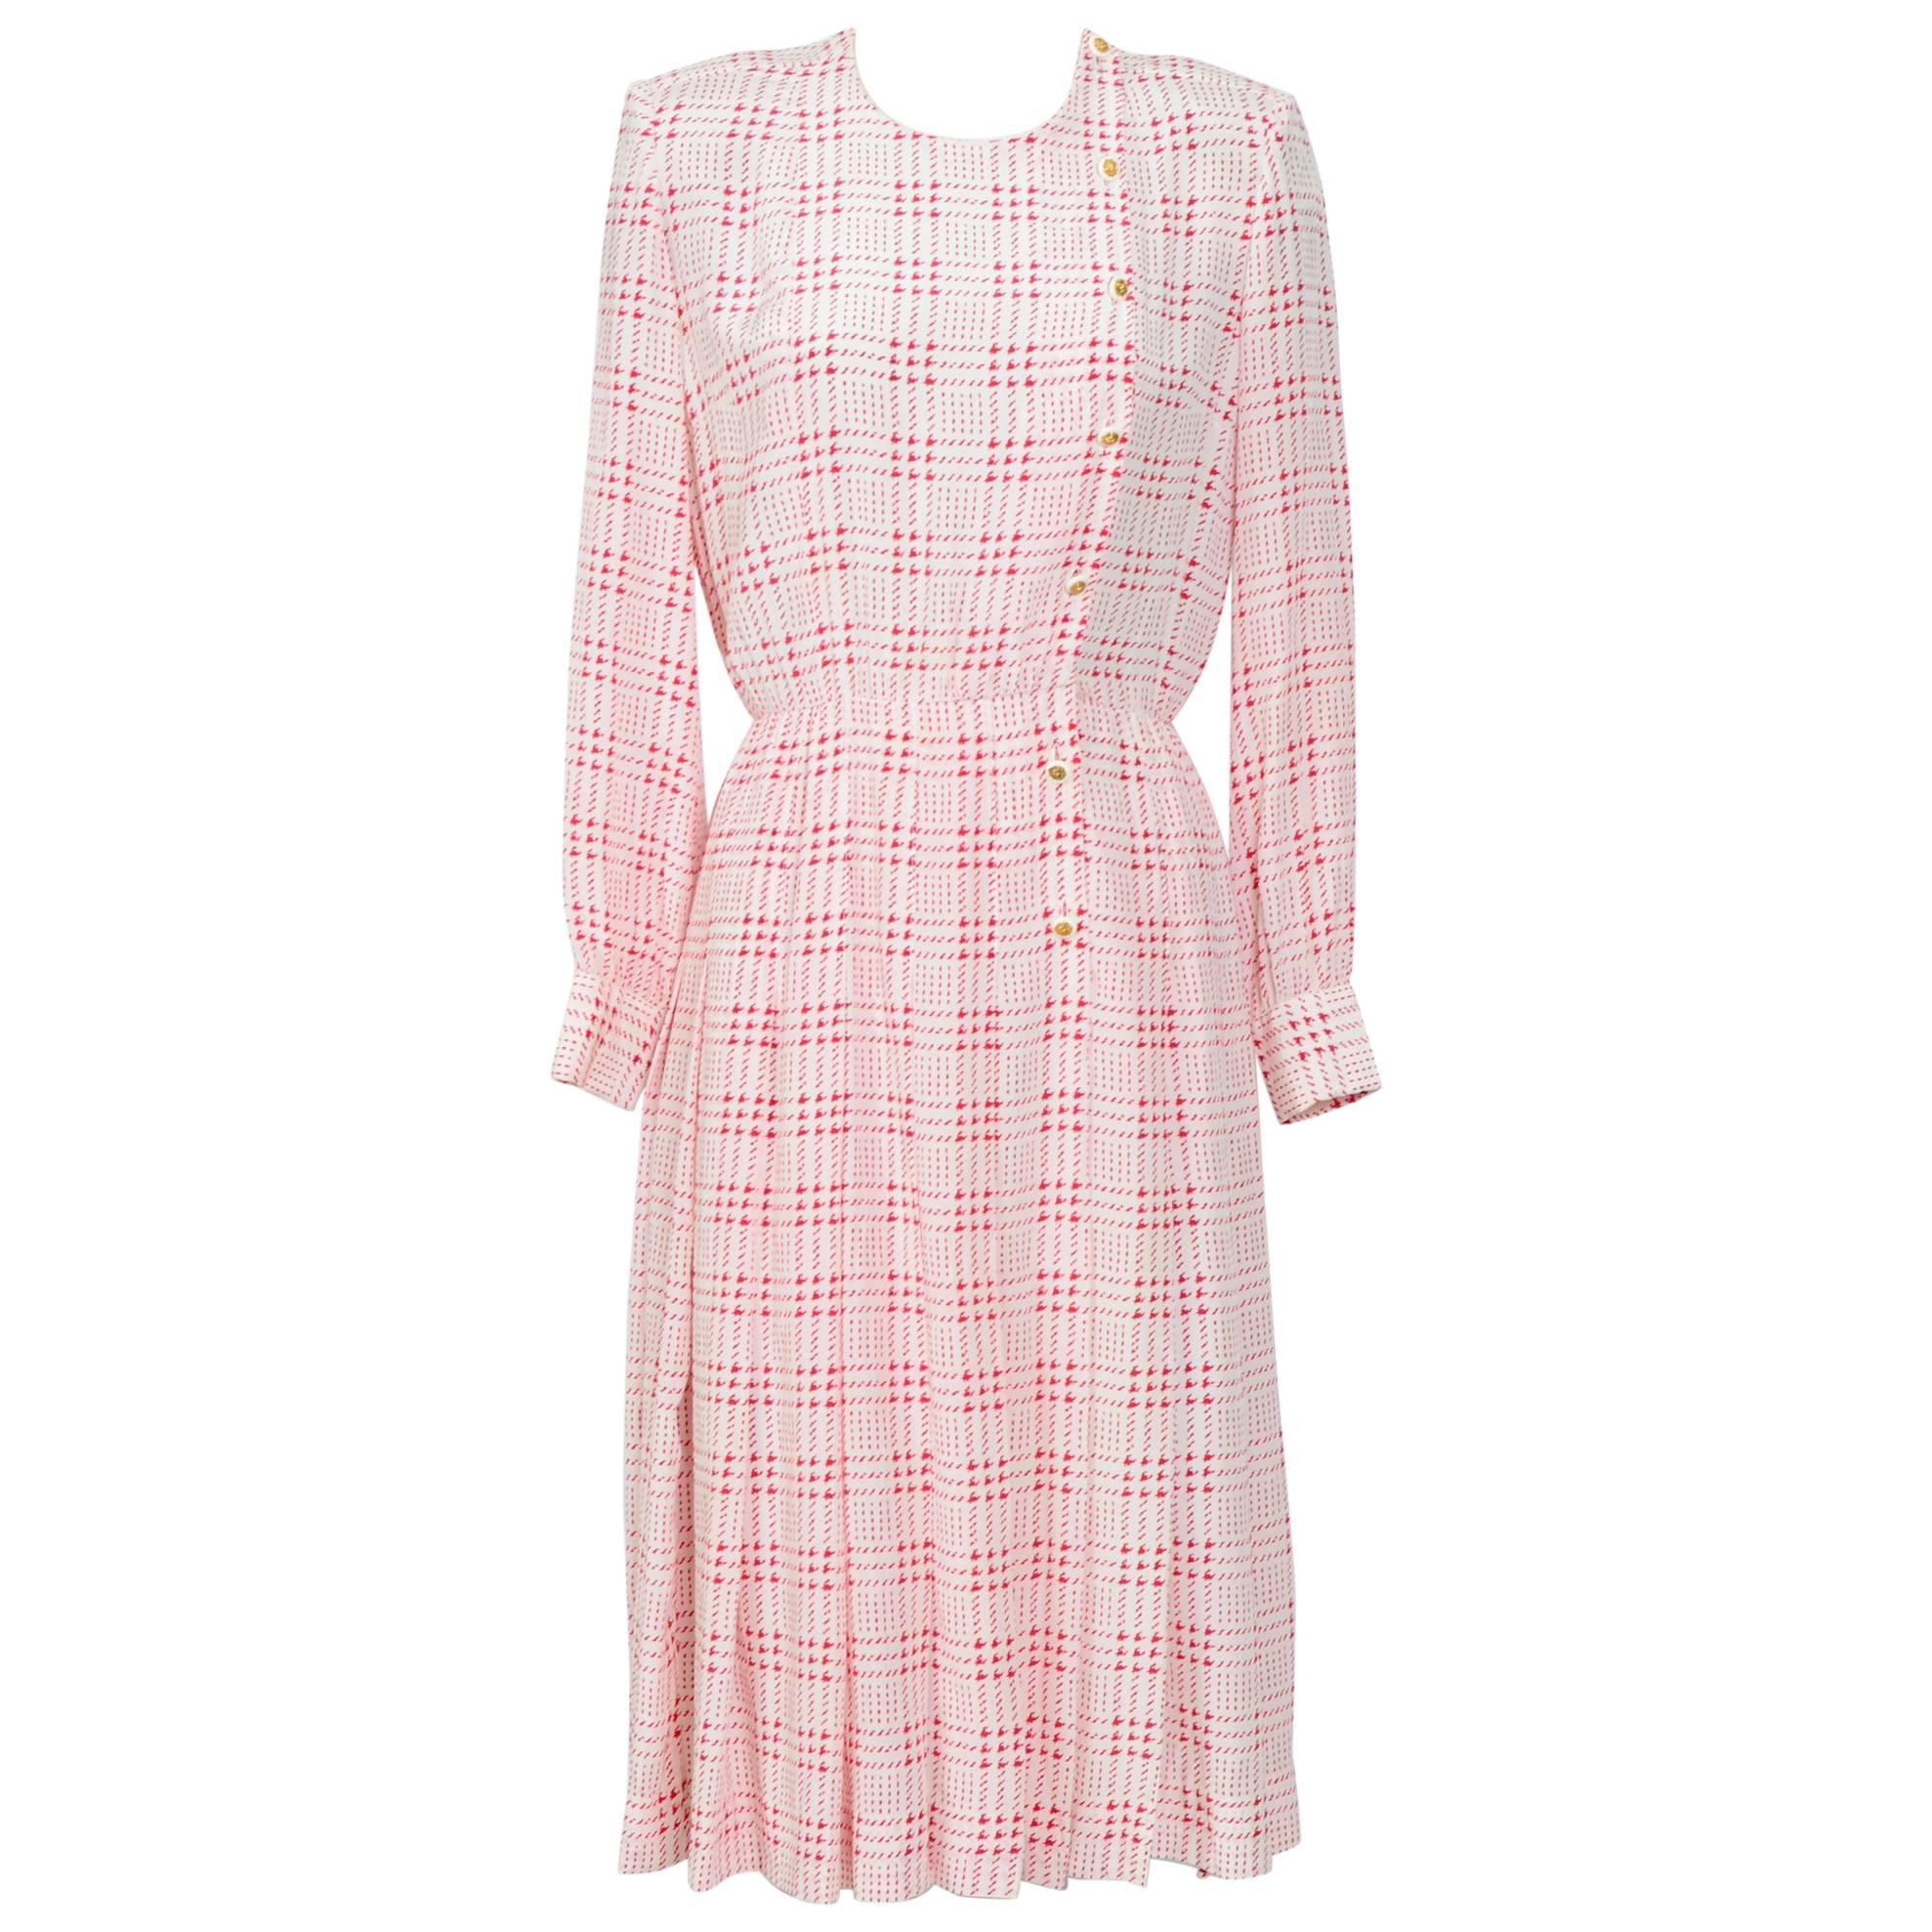 Chanel vintage 1970s printed white & pink silk dress with matching scarf